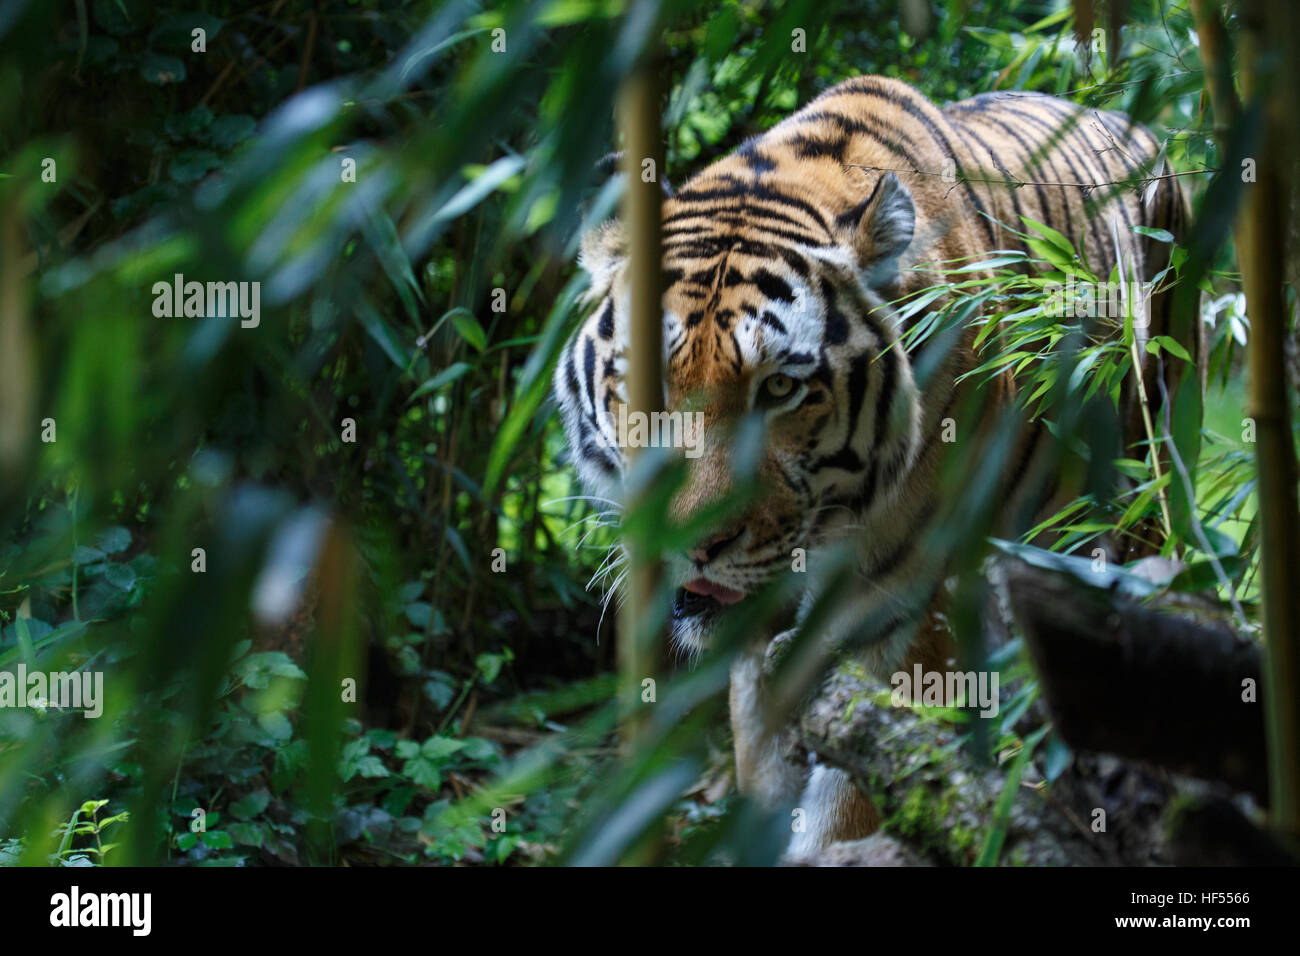 Siberian tiger or Amur tiger, Panthera tigris altaica, walking in the forest and ready for an ambush. Stock Photo